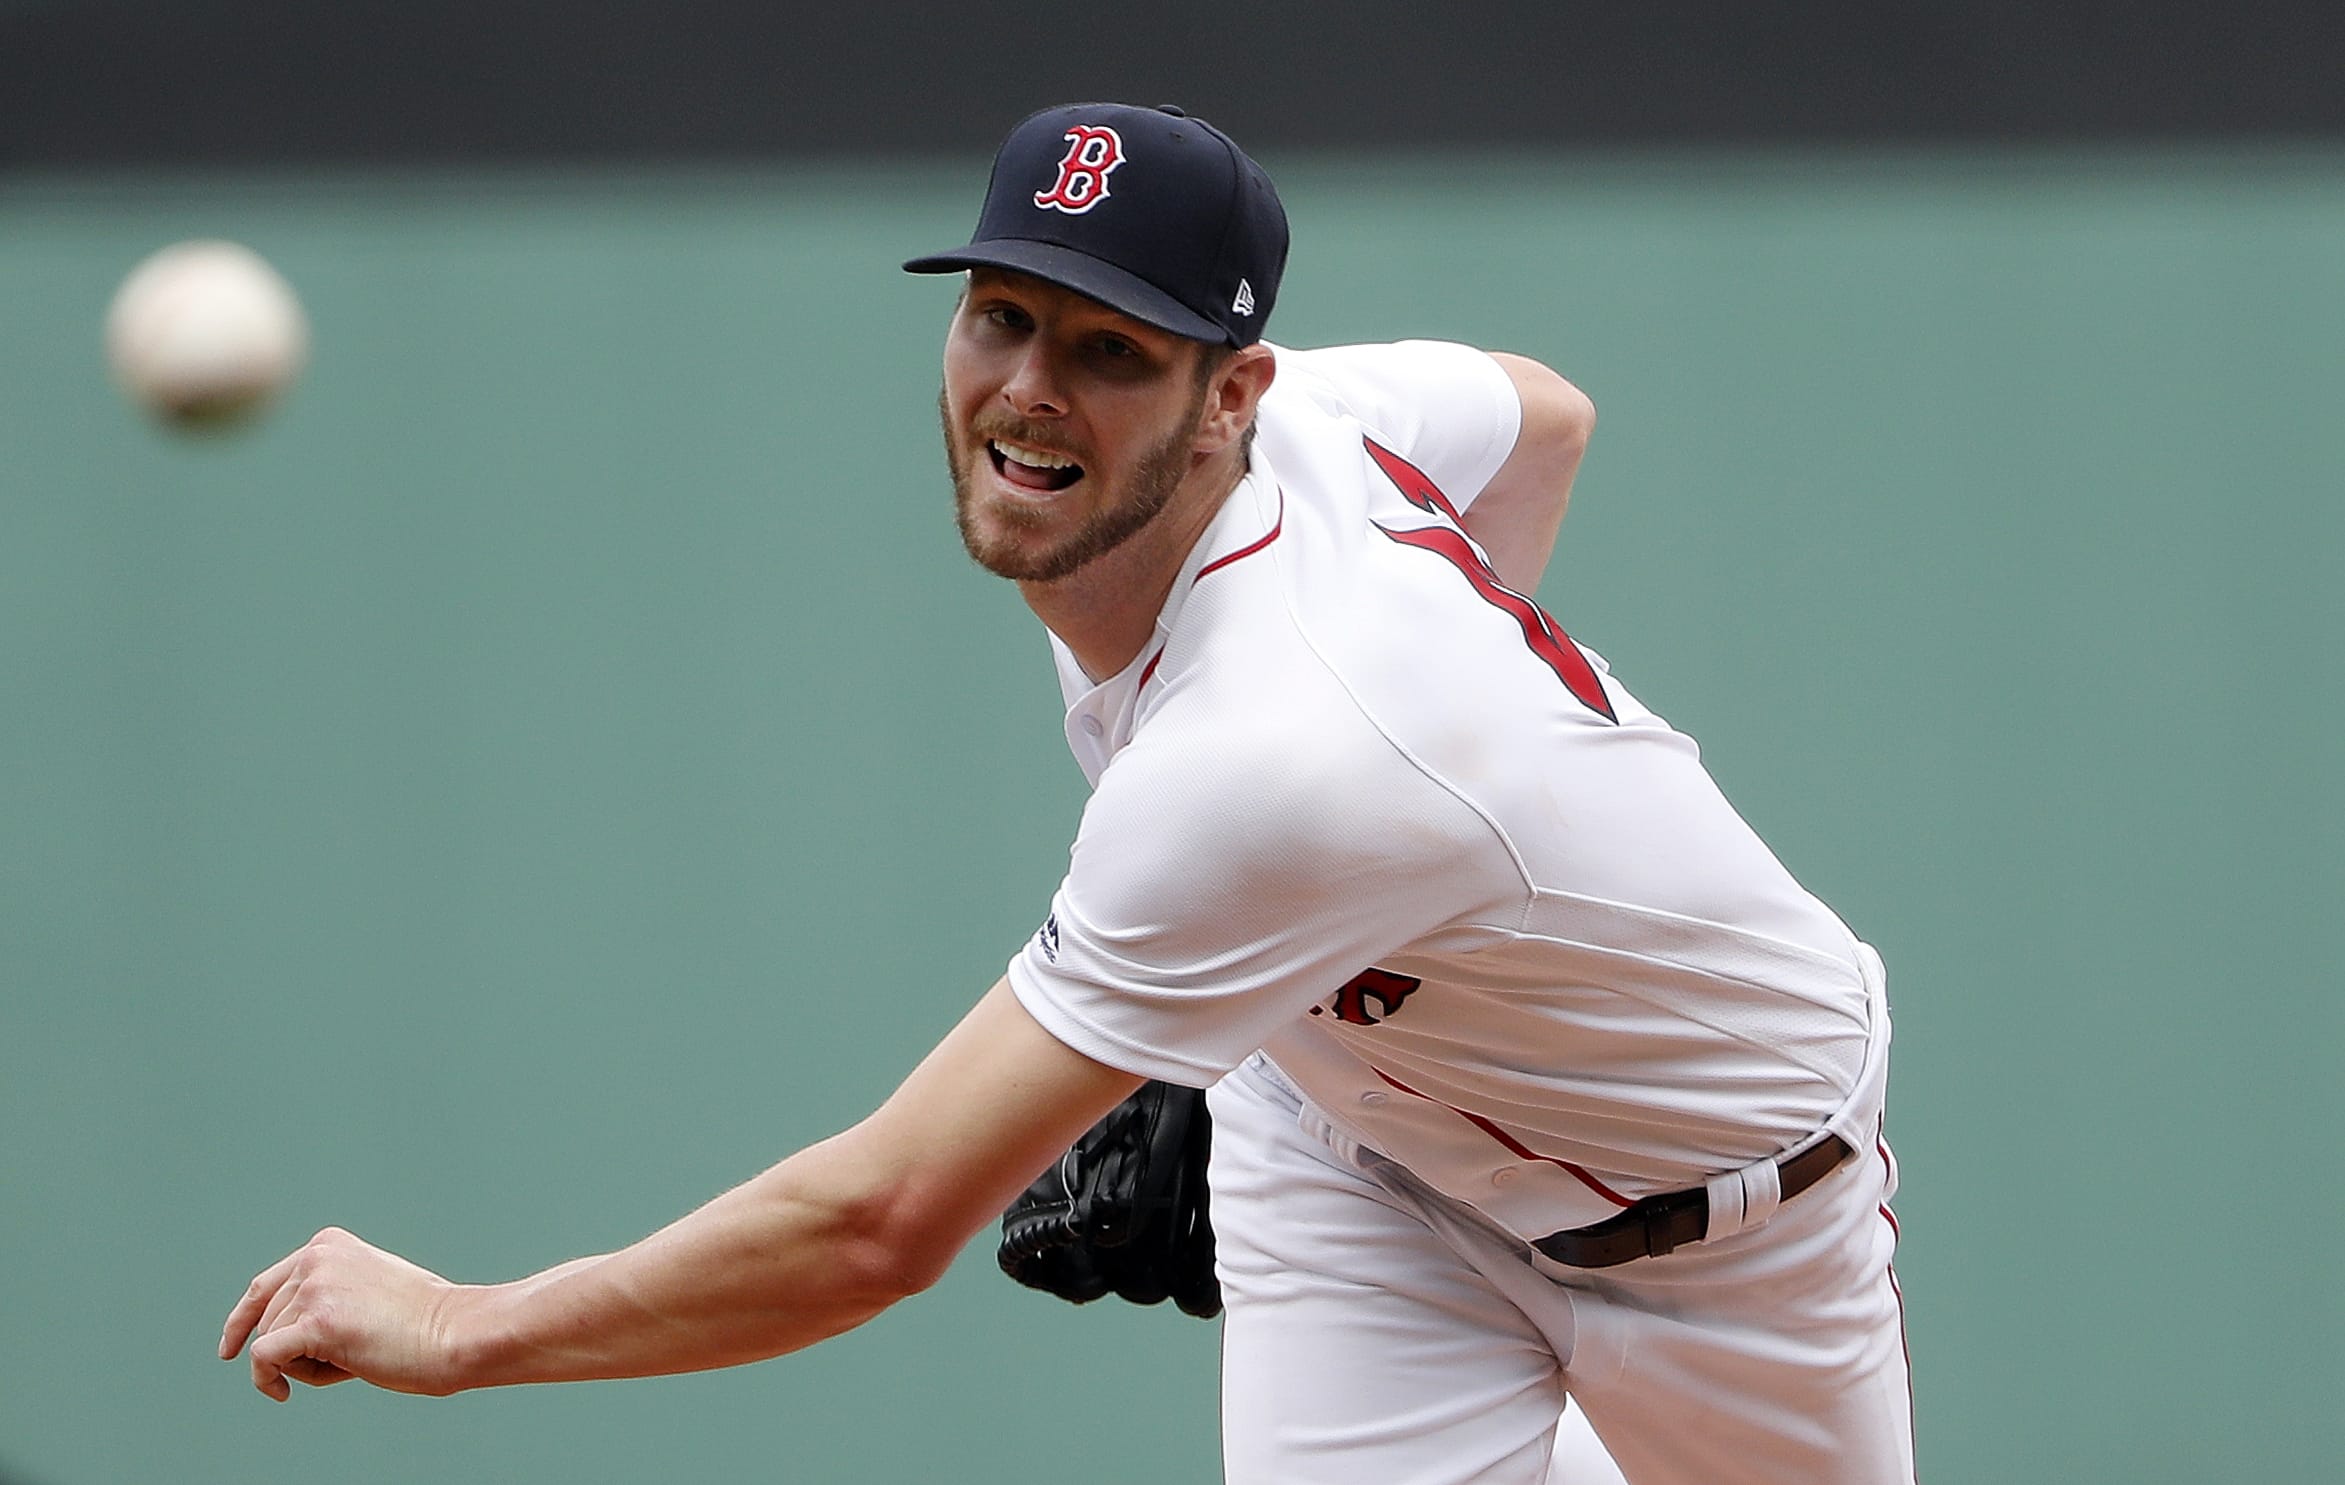 Boston Red Sox starting pitcher Chris Sale delivers against the Seattle Mariners during the first inning of a baseball game at Fenway Park in Boston Sunday, June 24, 2018.